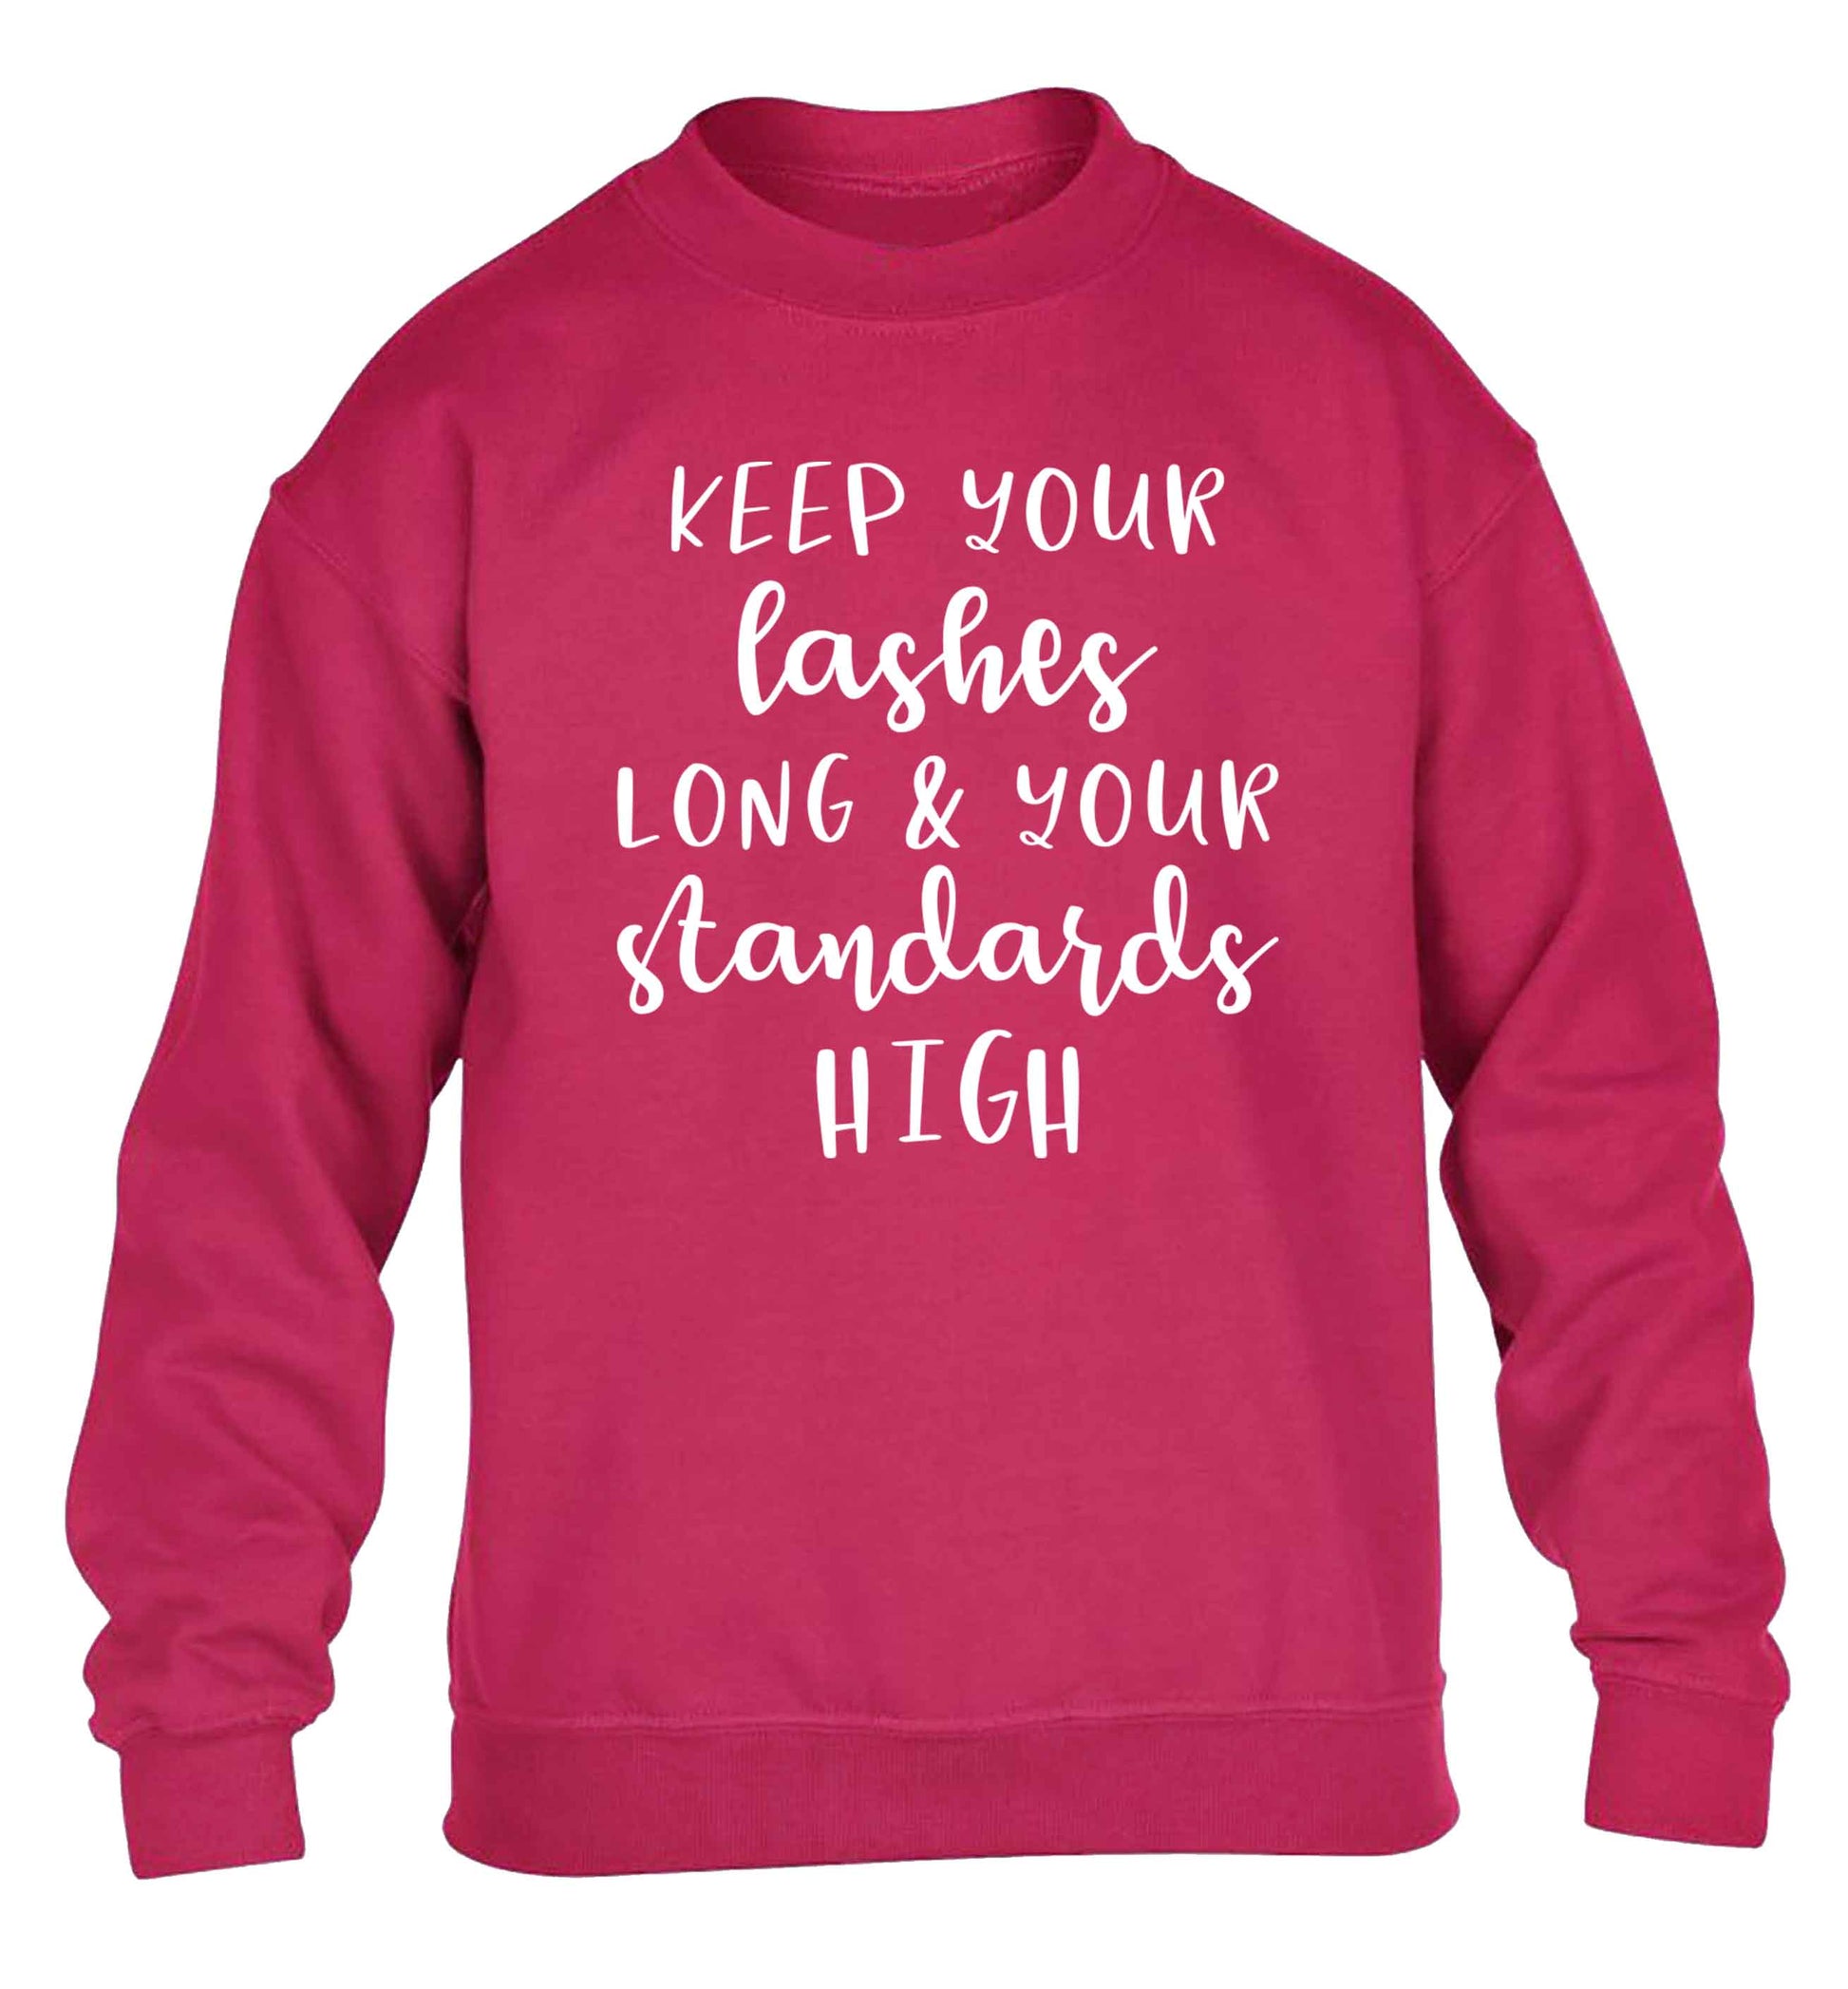 Keep your lashes long and your standards high children's pink sweater 12-13 Years